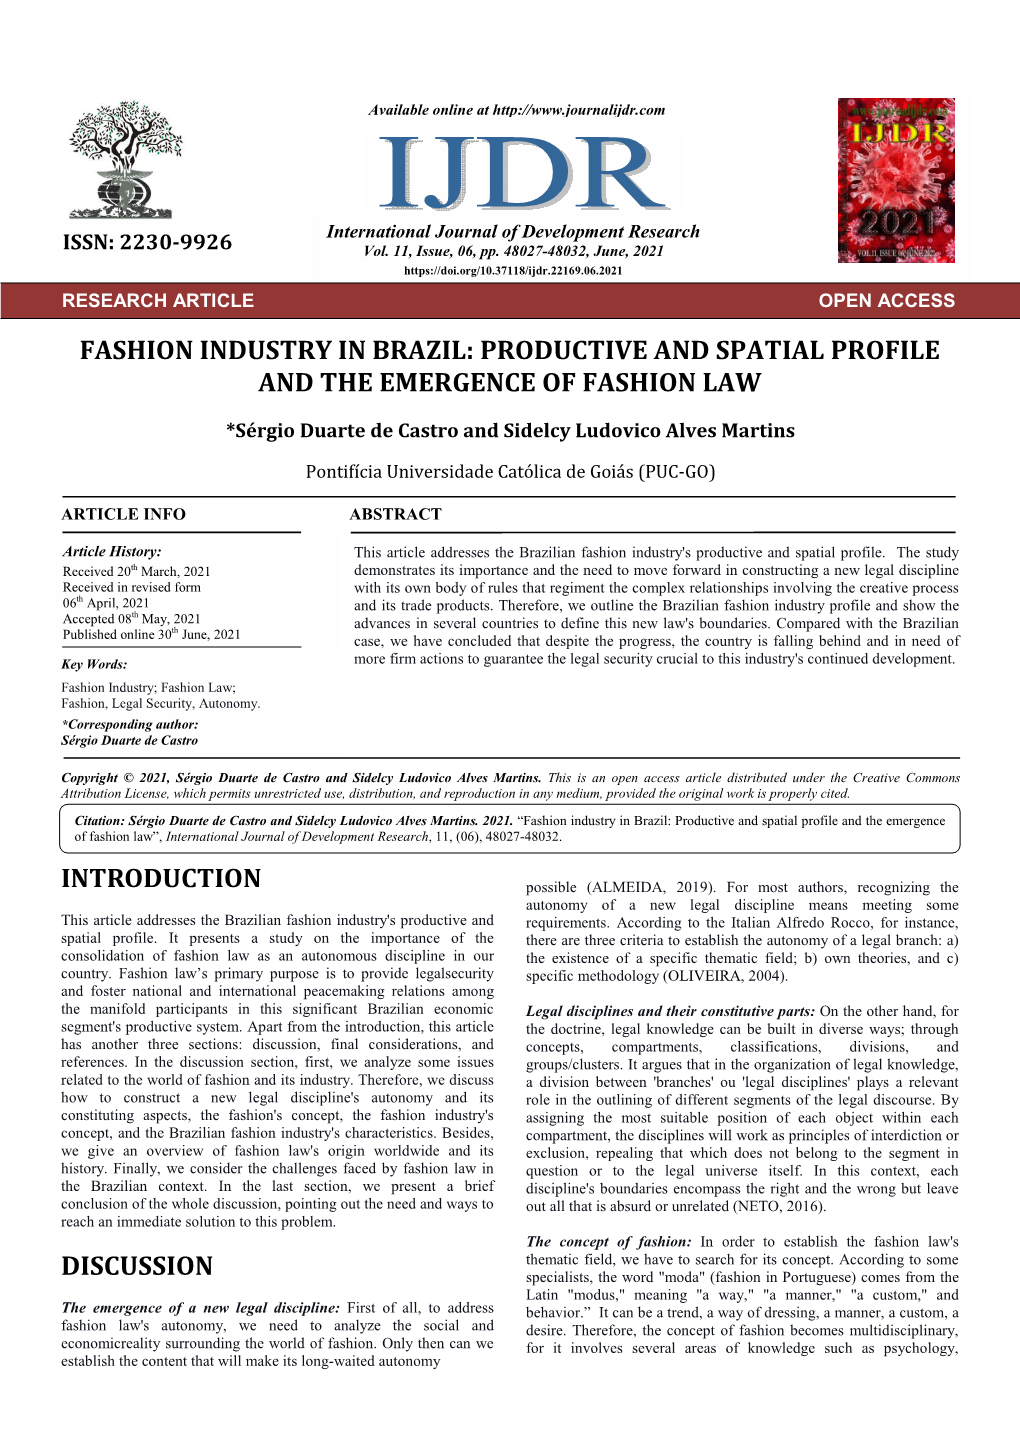 Fashion Industry in Brazil: Productive and Spatial Profile and the Emergence of Fashion Law